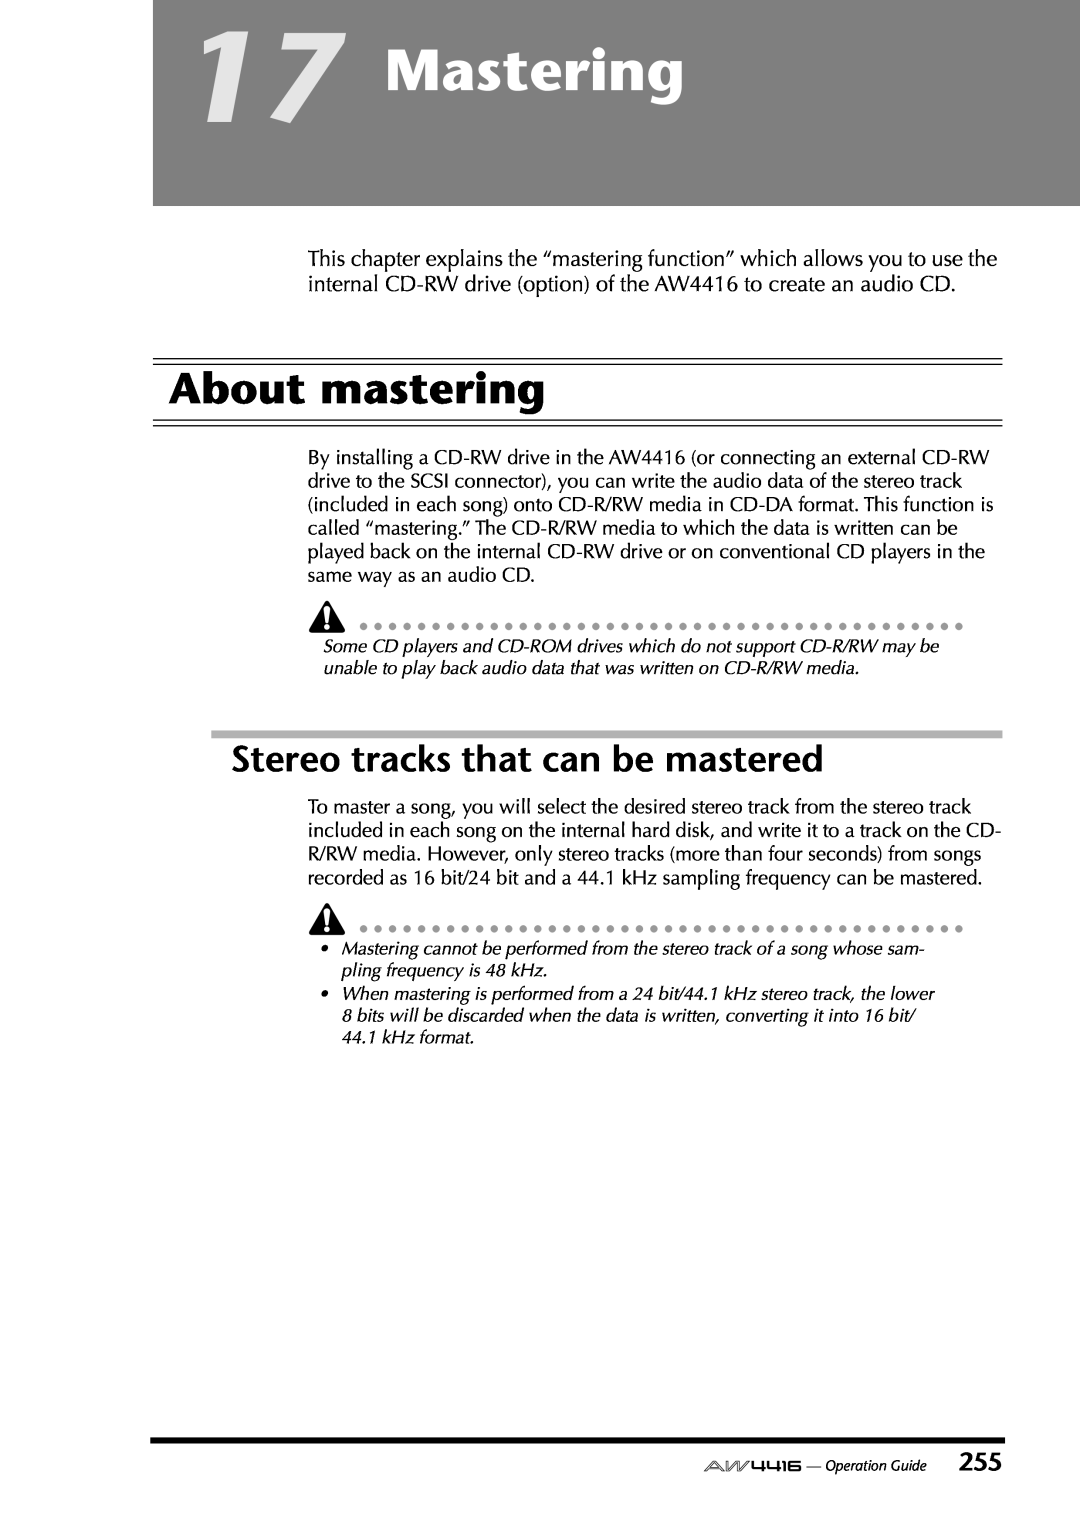 Yamaha AW4416 manual Mastering, About mastering, Stereo tracks that can be mastered 